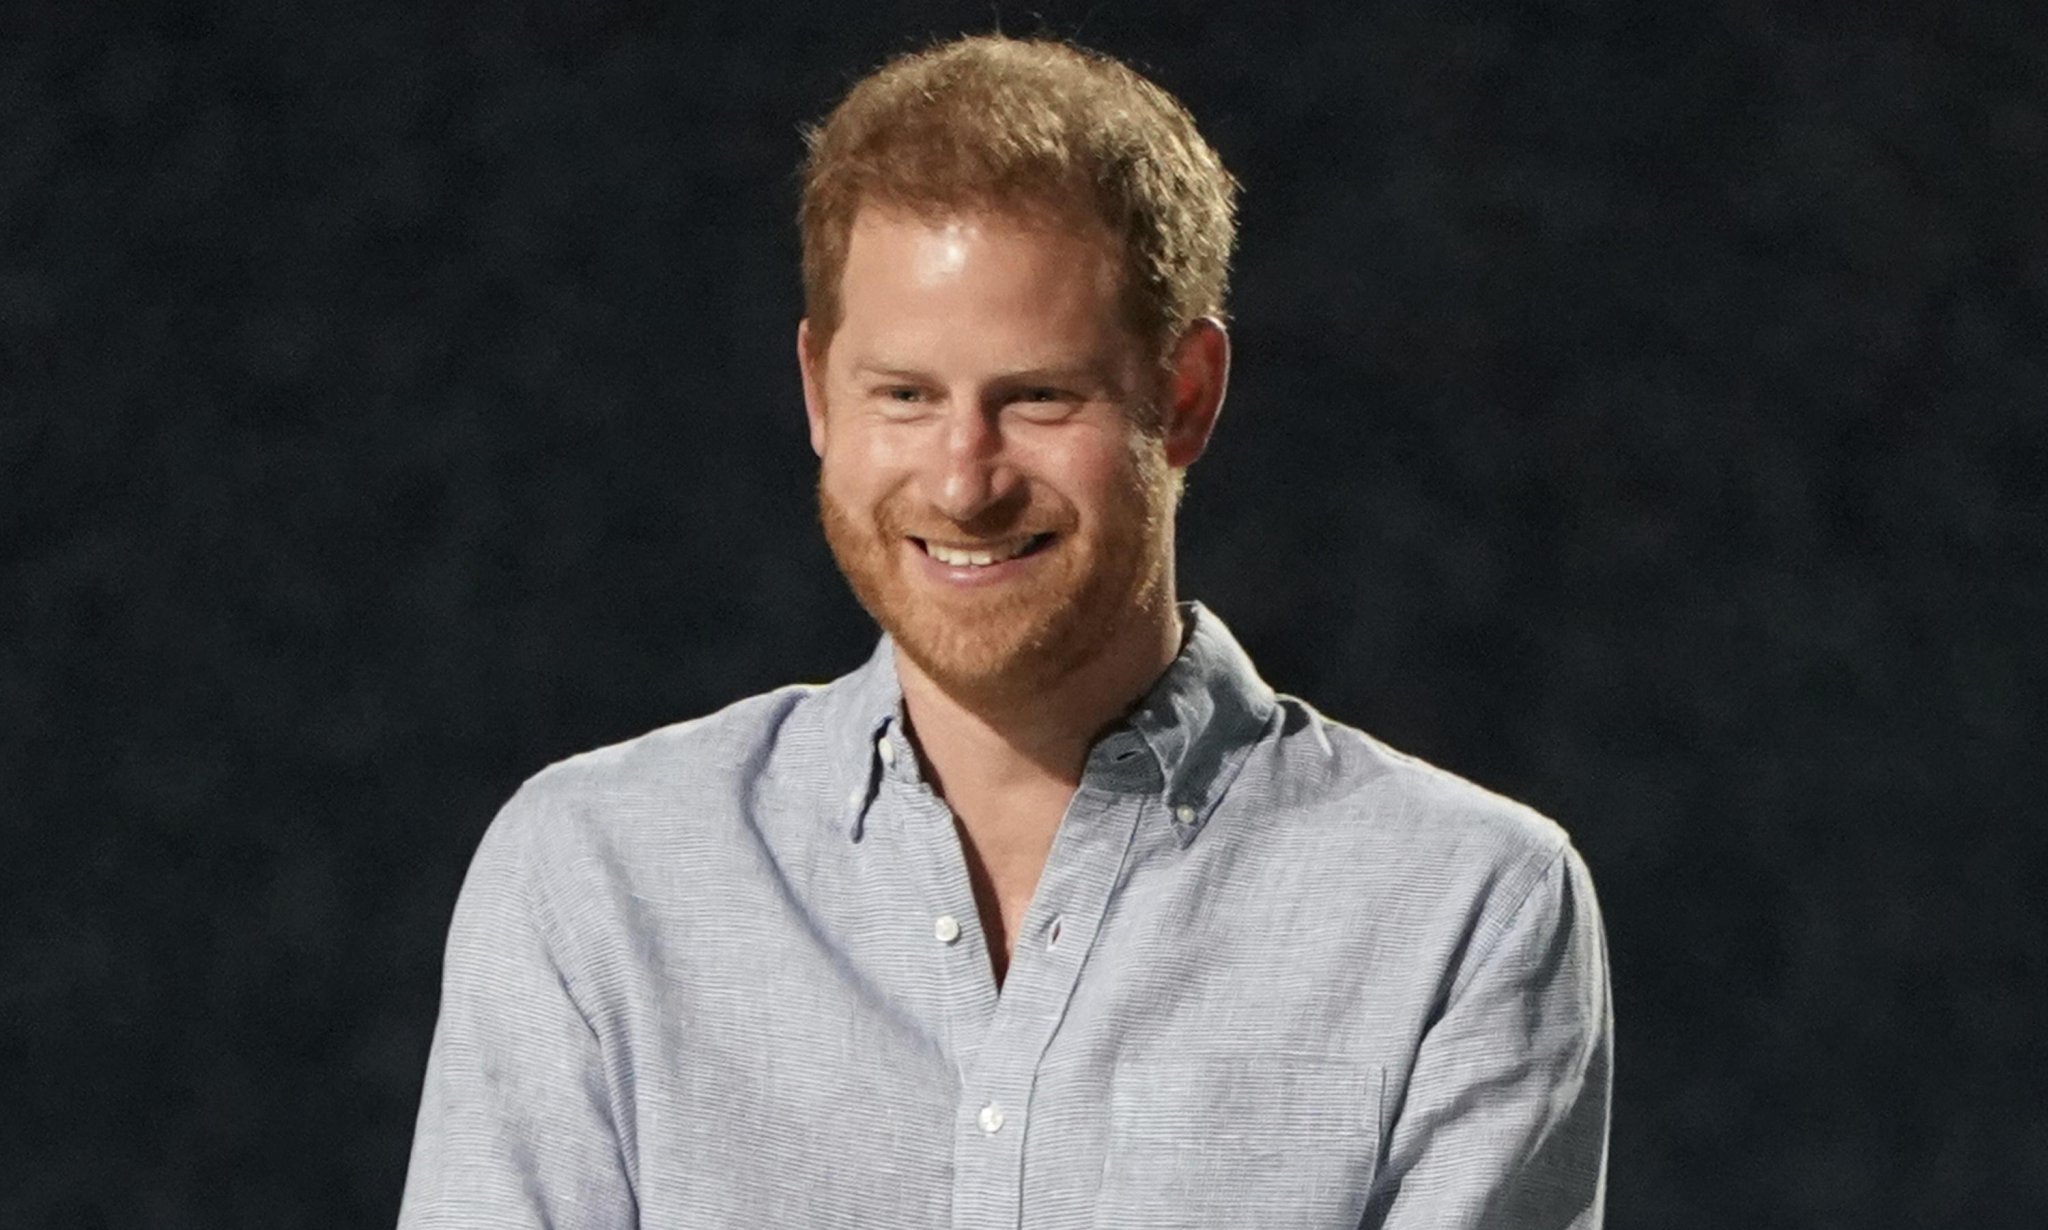 Prince Harry’s ‘unflinching’ memoir, Spare, to be published in January